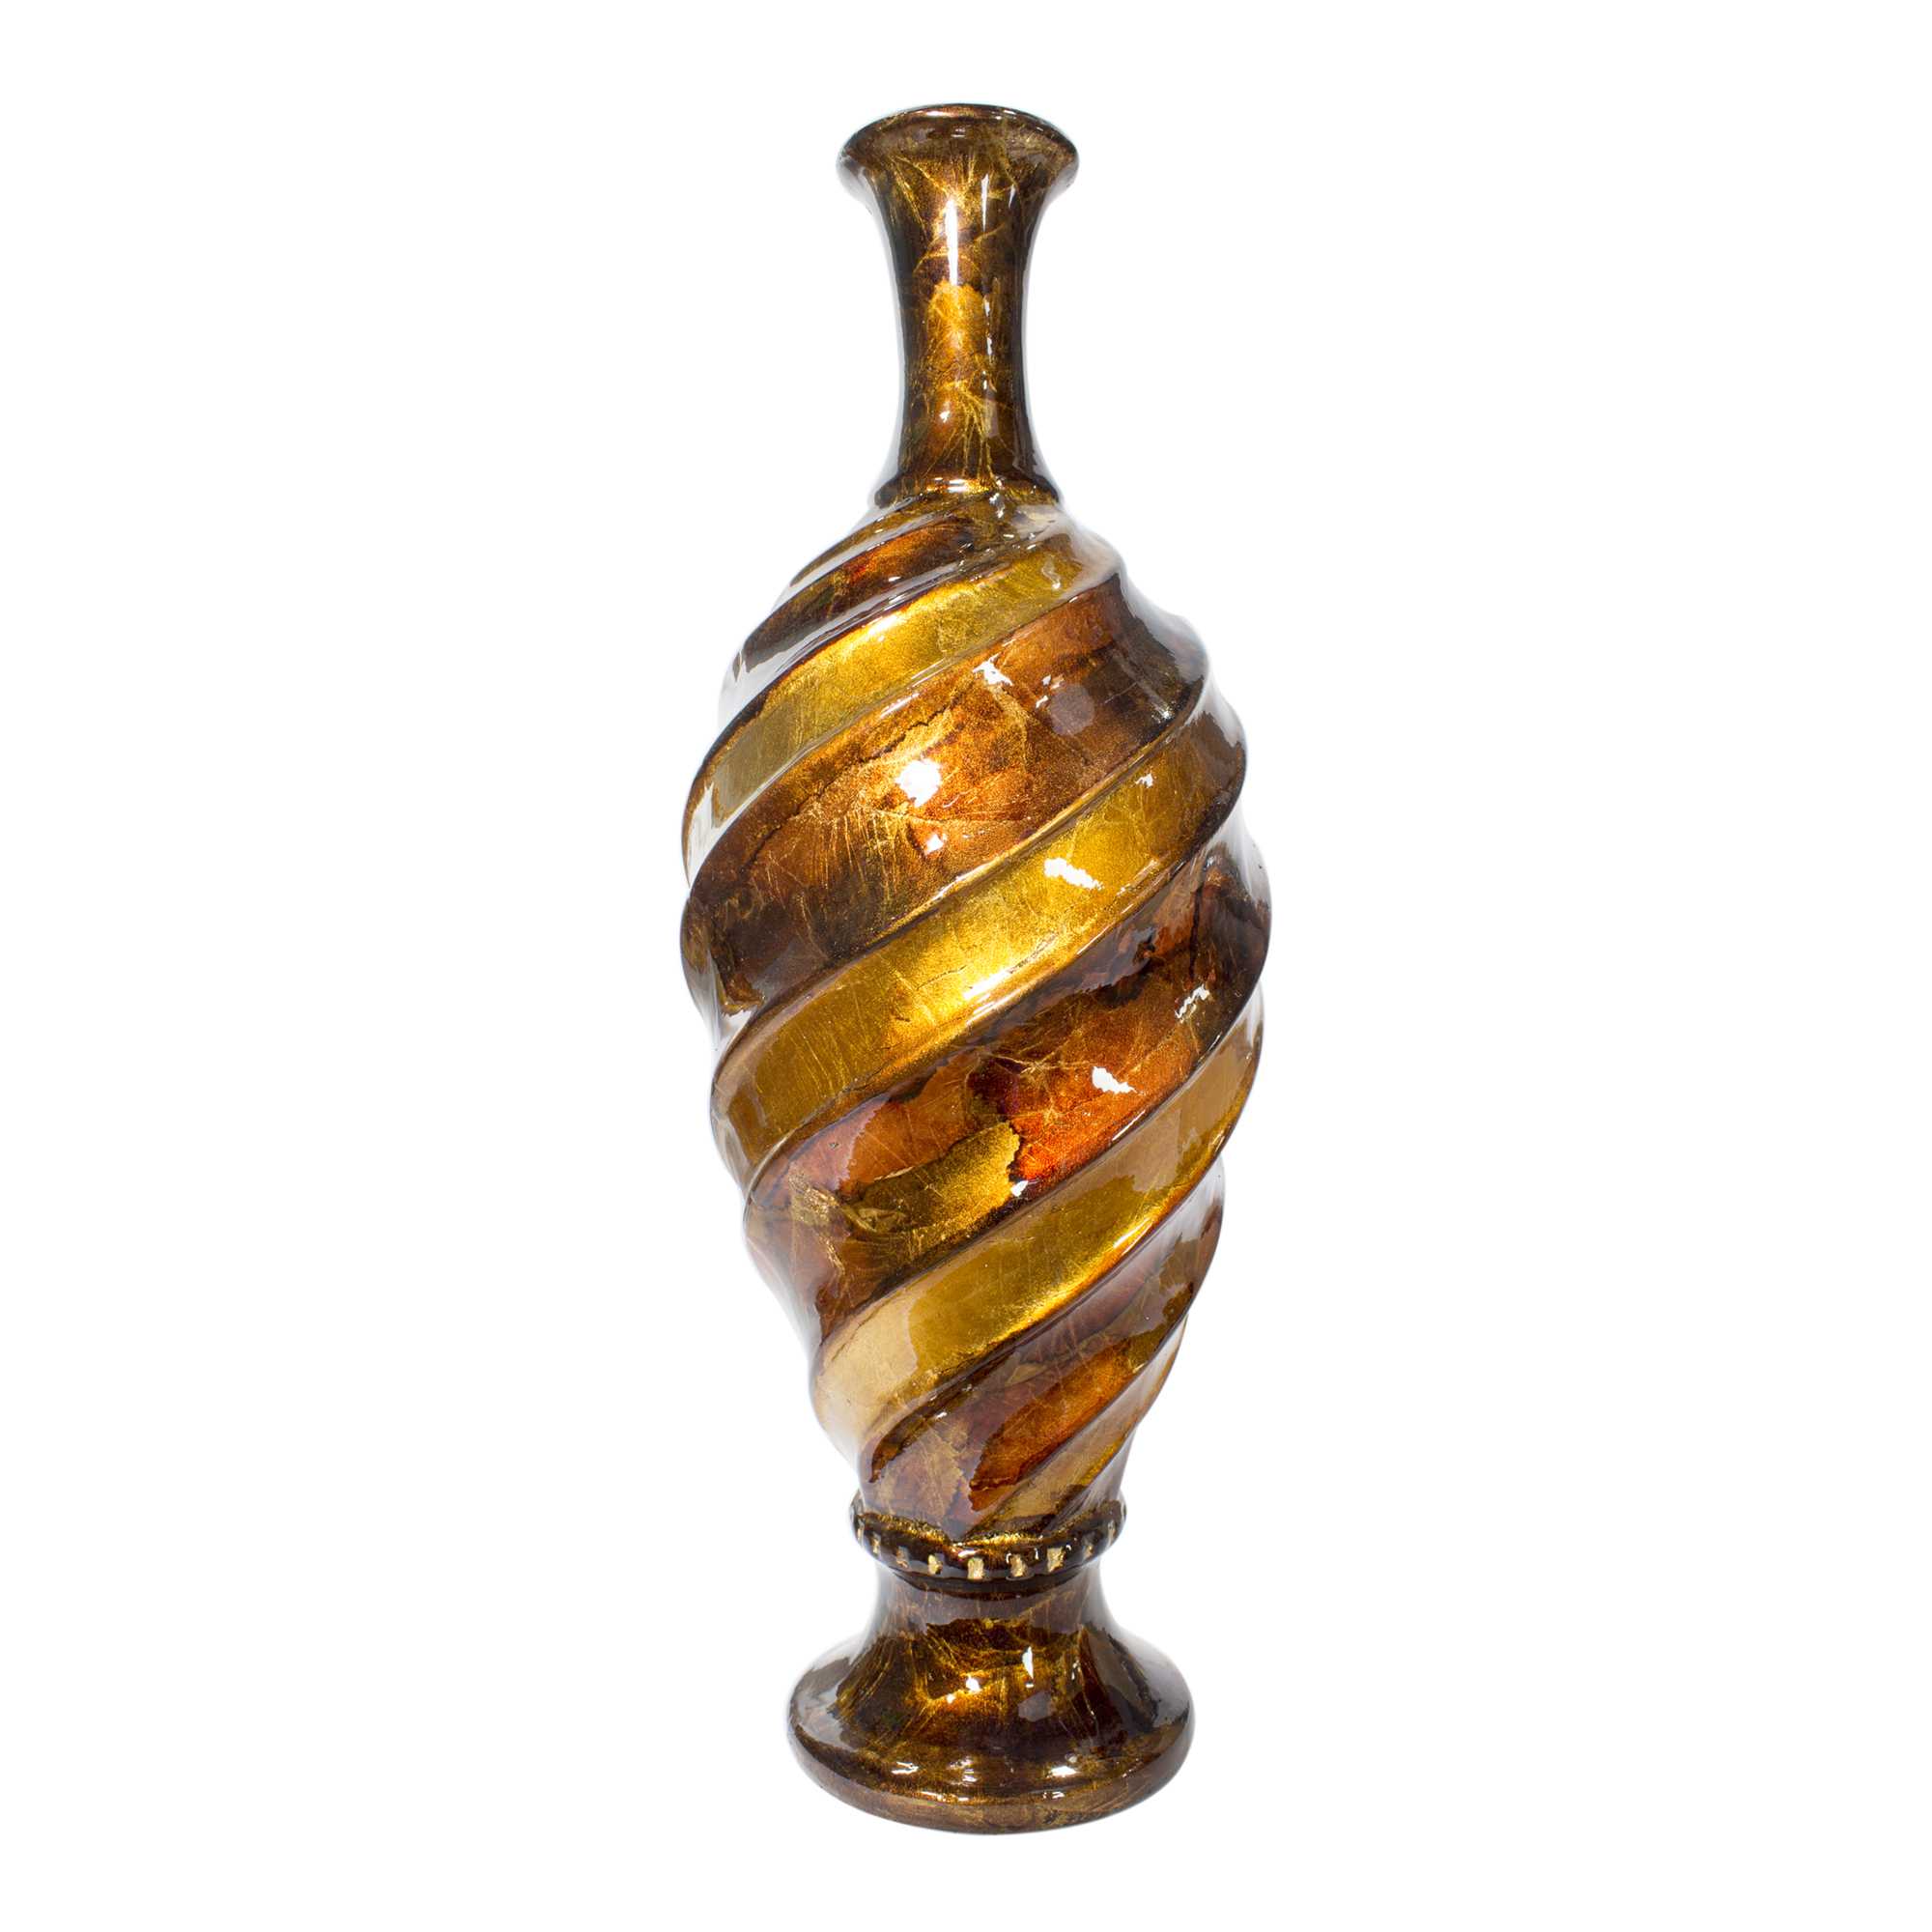 Swirl Copper Brown and Amber Ceramic Foil and Lacquer Bud Vase